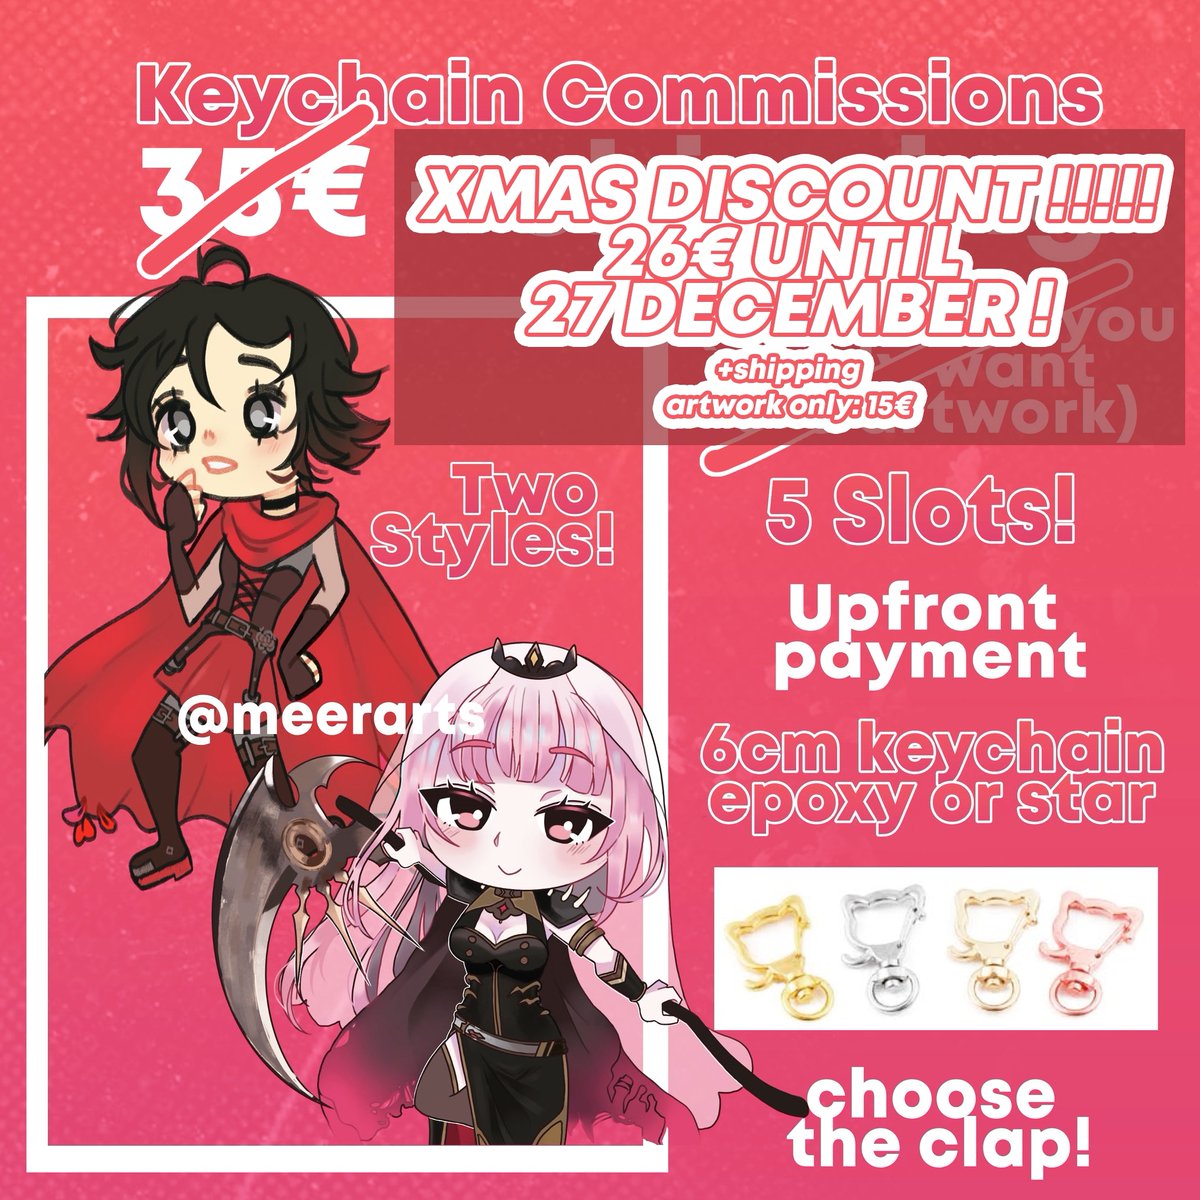 SHARE PLEASE! RT ARE APPRECIATED ⚠️

And It includes a custom artwork of your choice and the physical keychain. 

You can also order only the artwork for 15€

#keychaincommission #comms #commsopen #commissionsopen #commissions #customkeychain #chibicommission